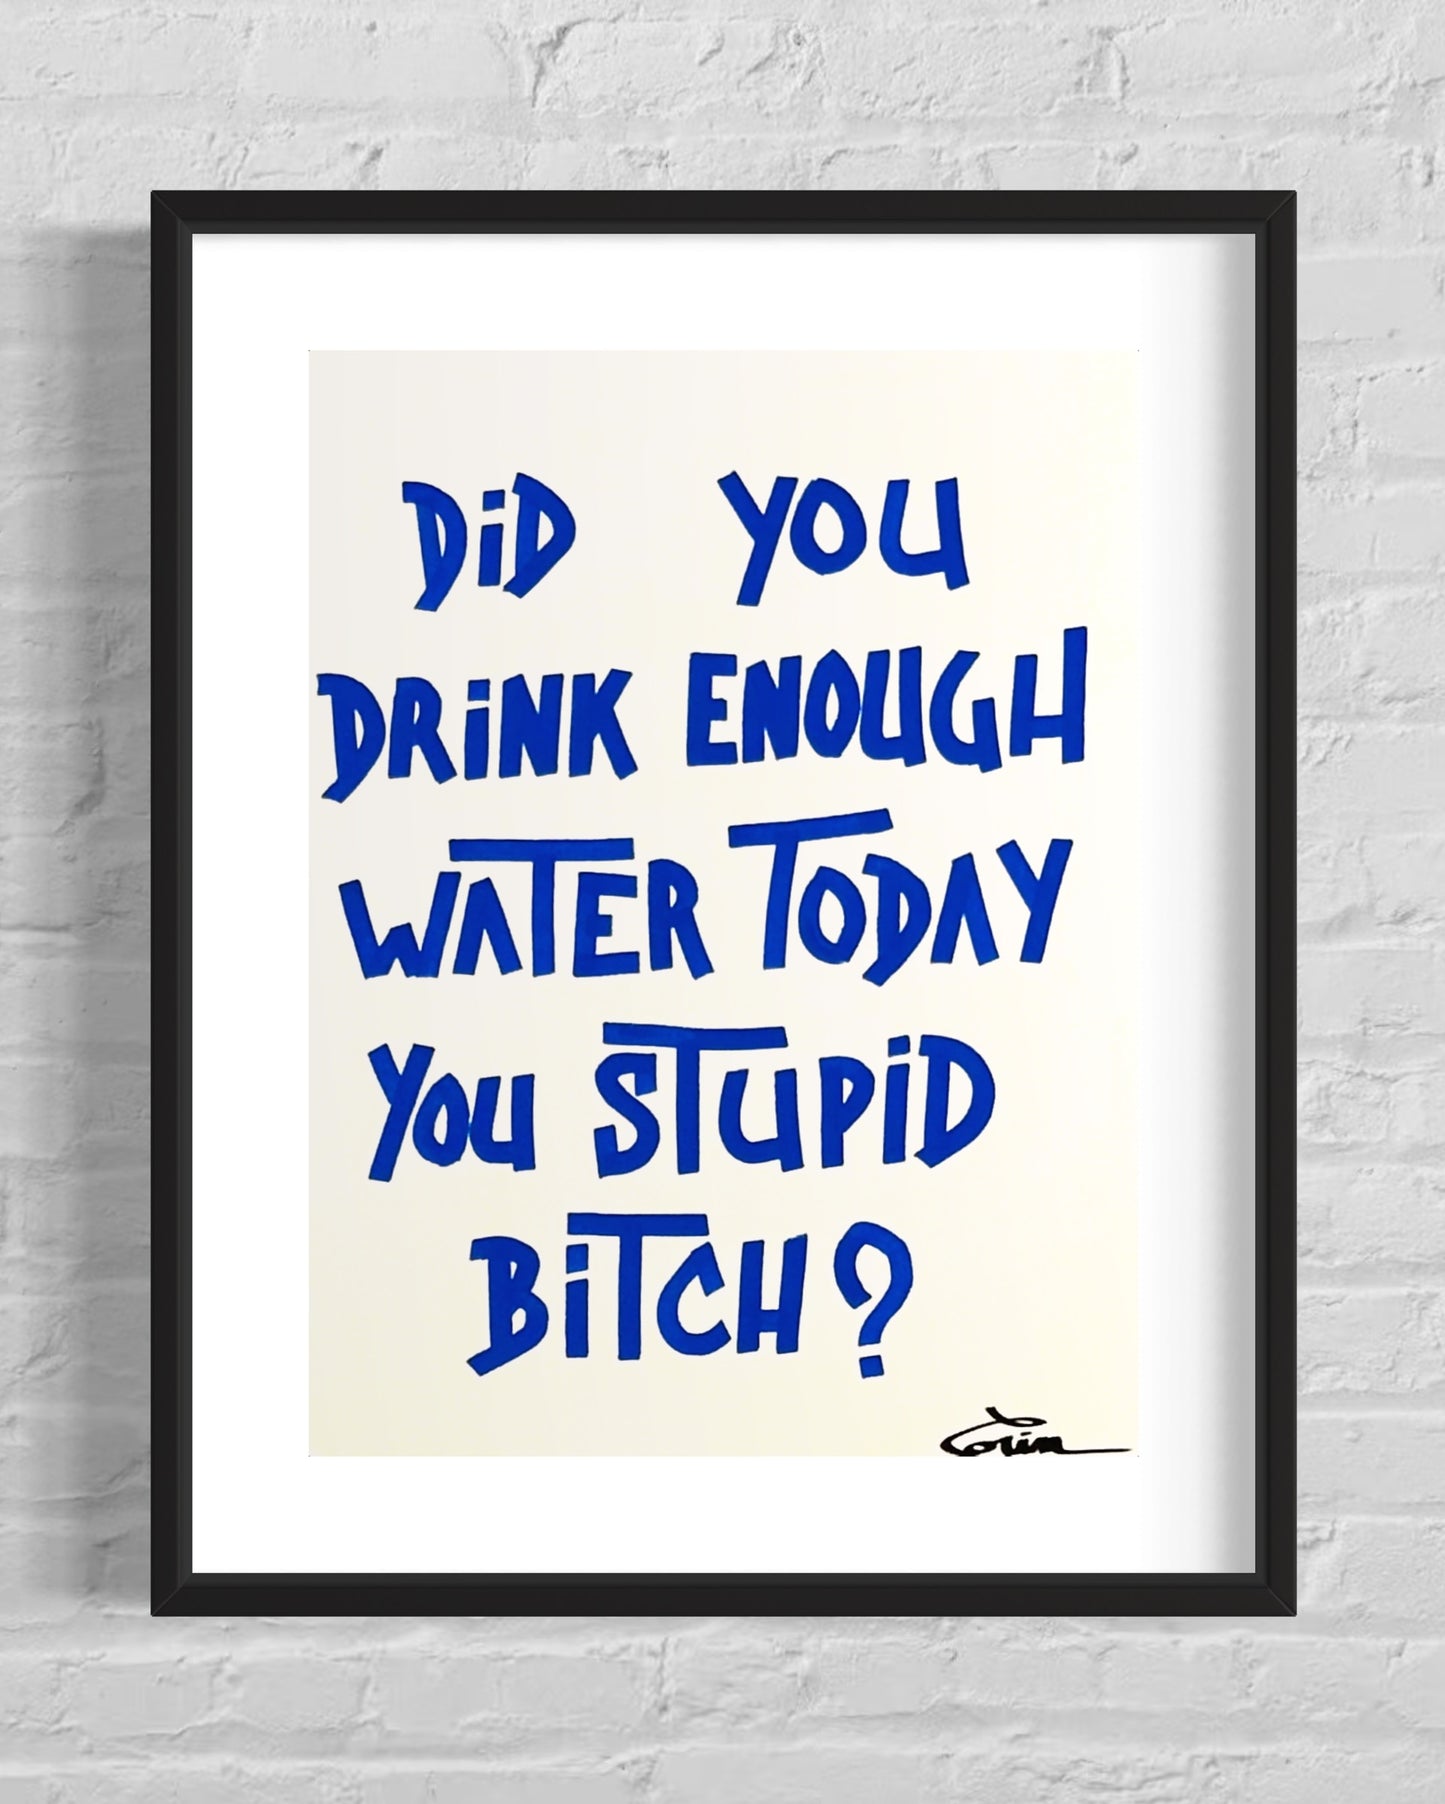 DID YOU DRINK ENOUGH WATER?